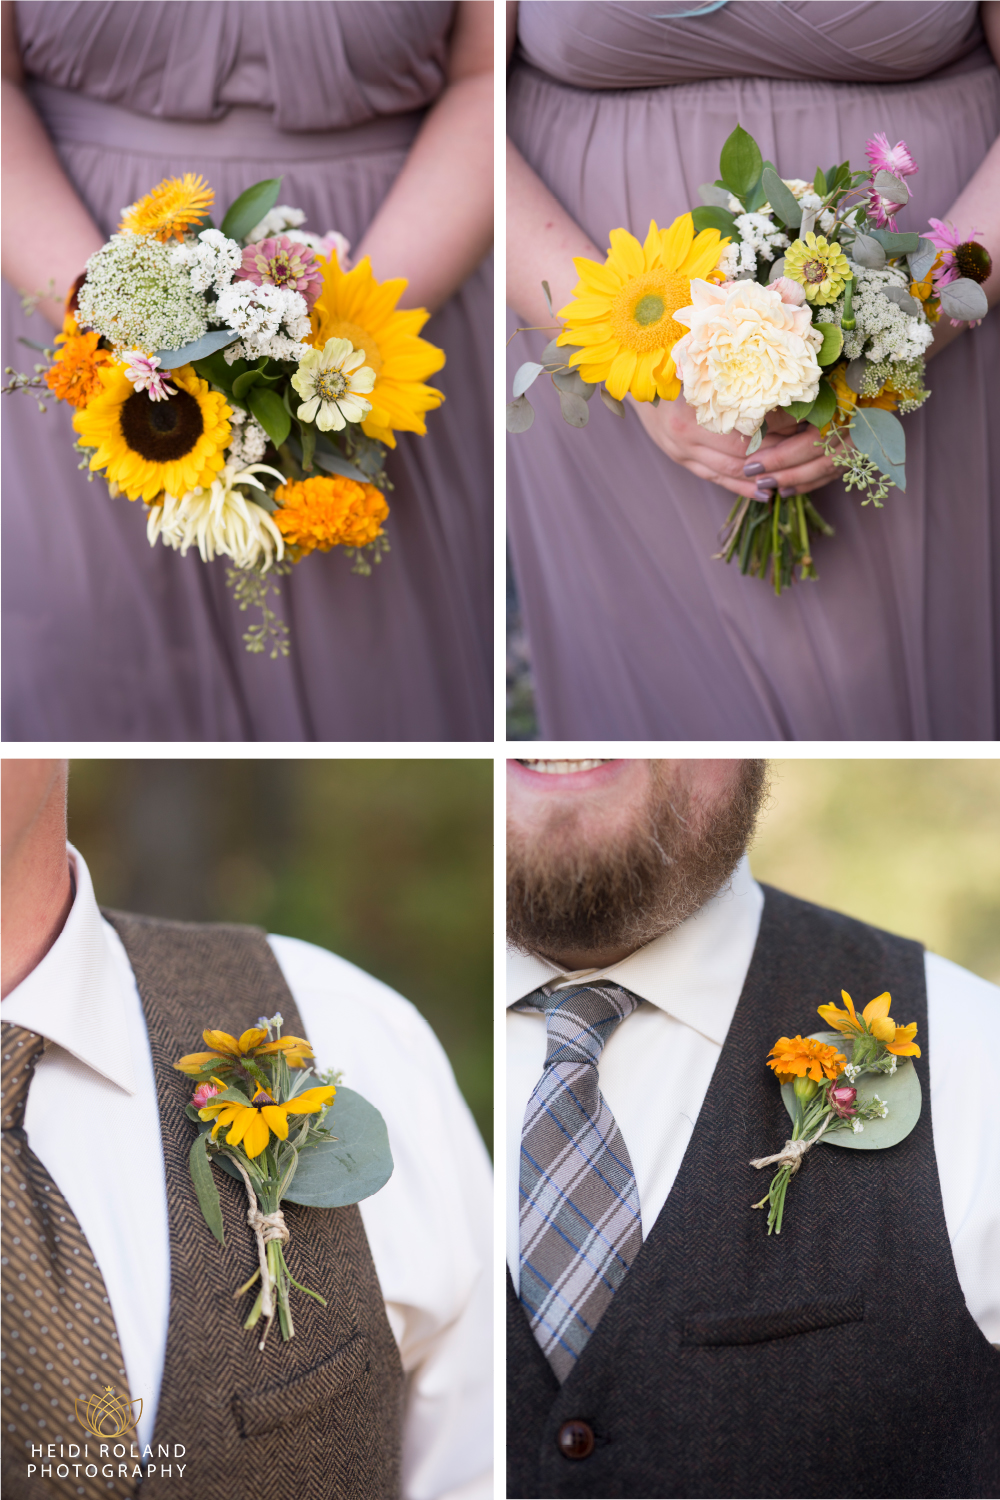 DIY wedding bouquets and boutonniere